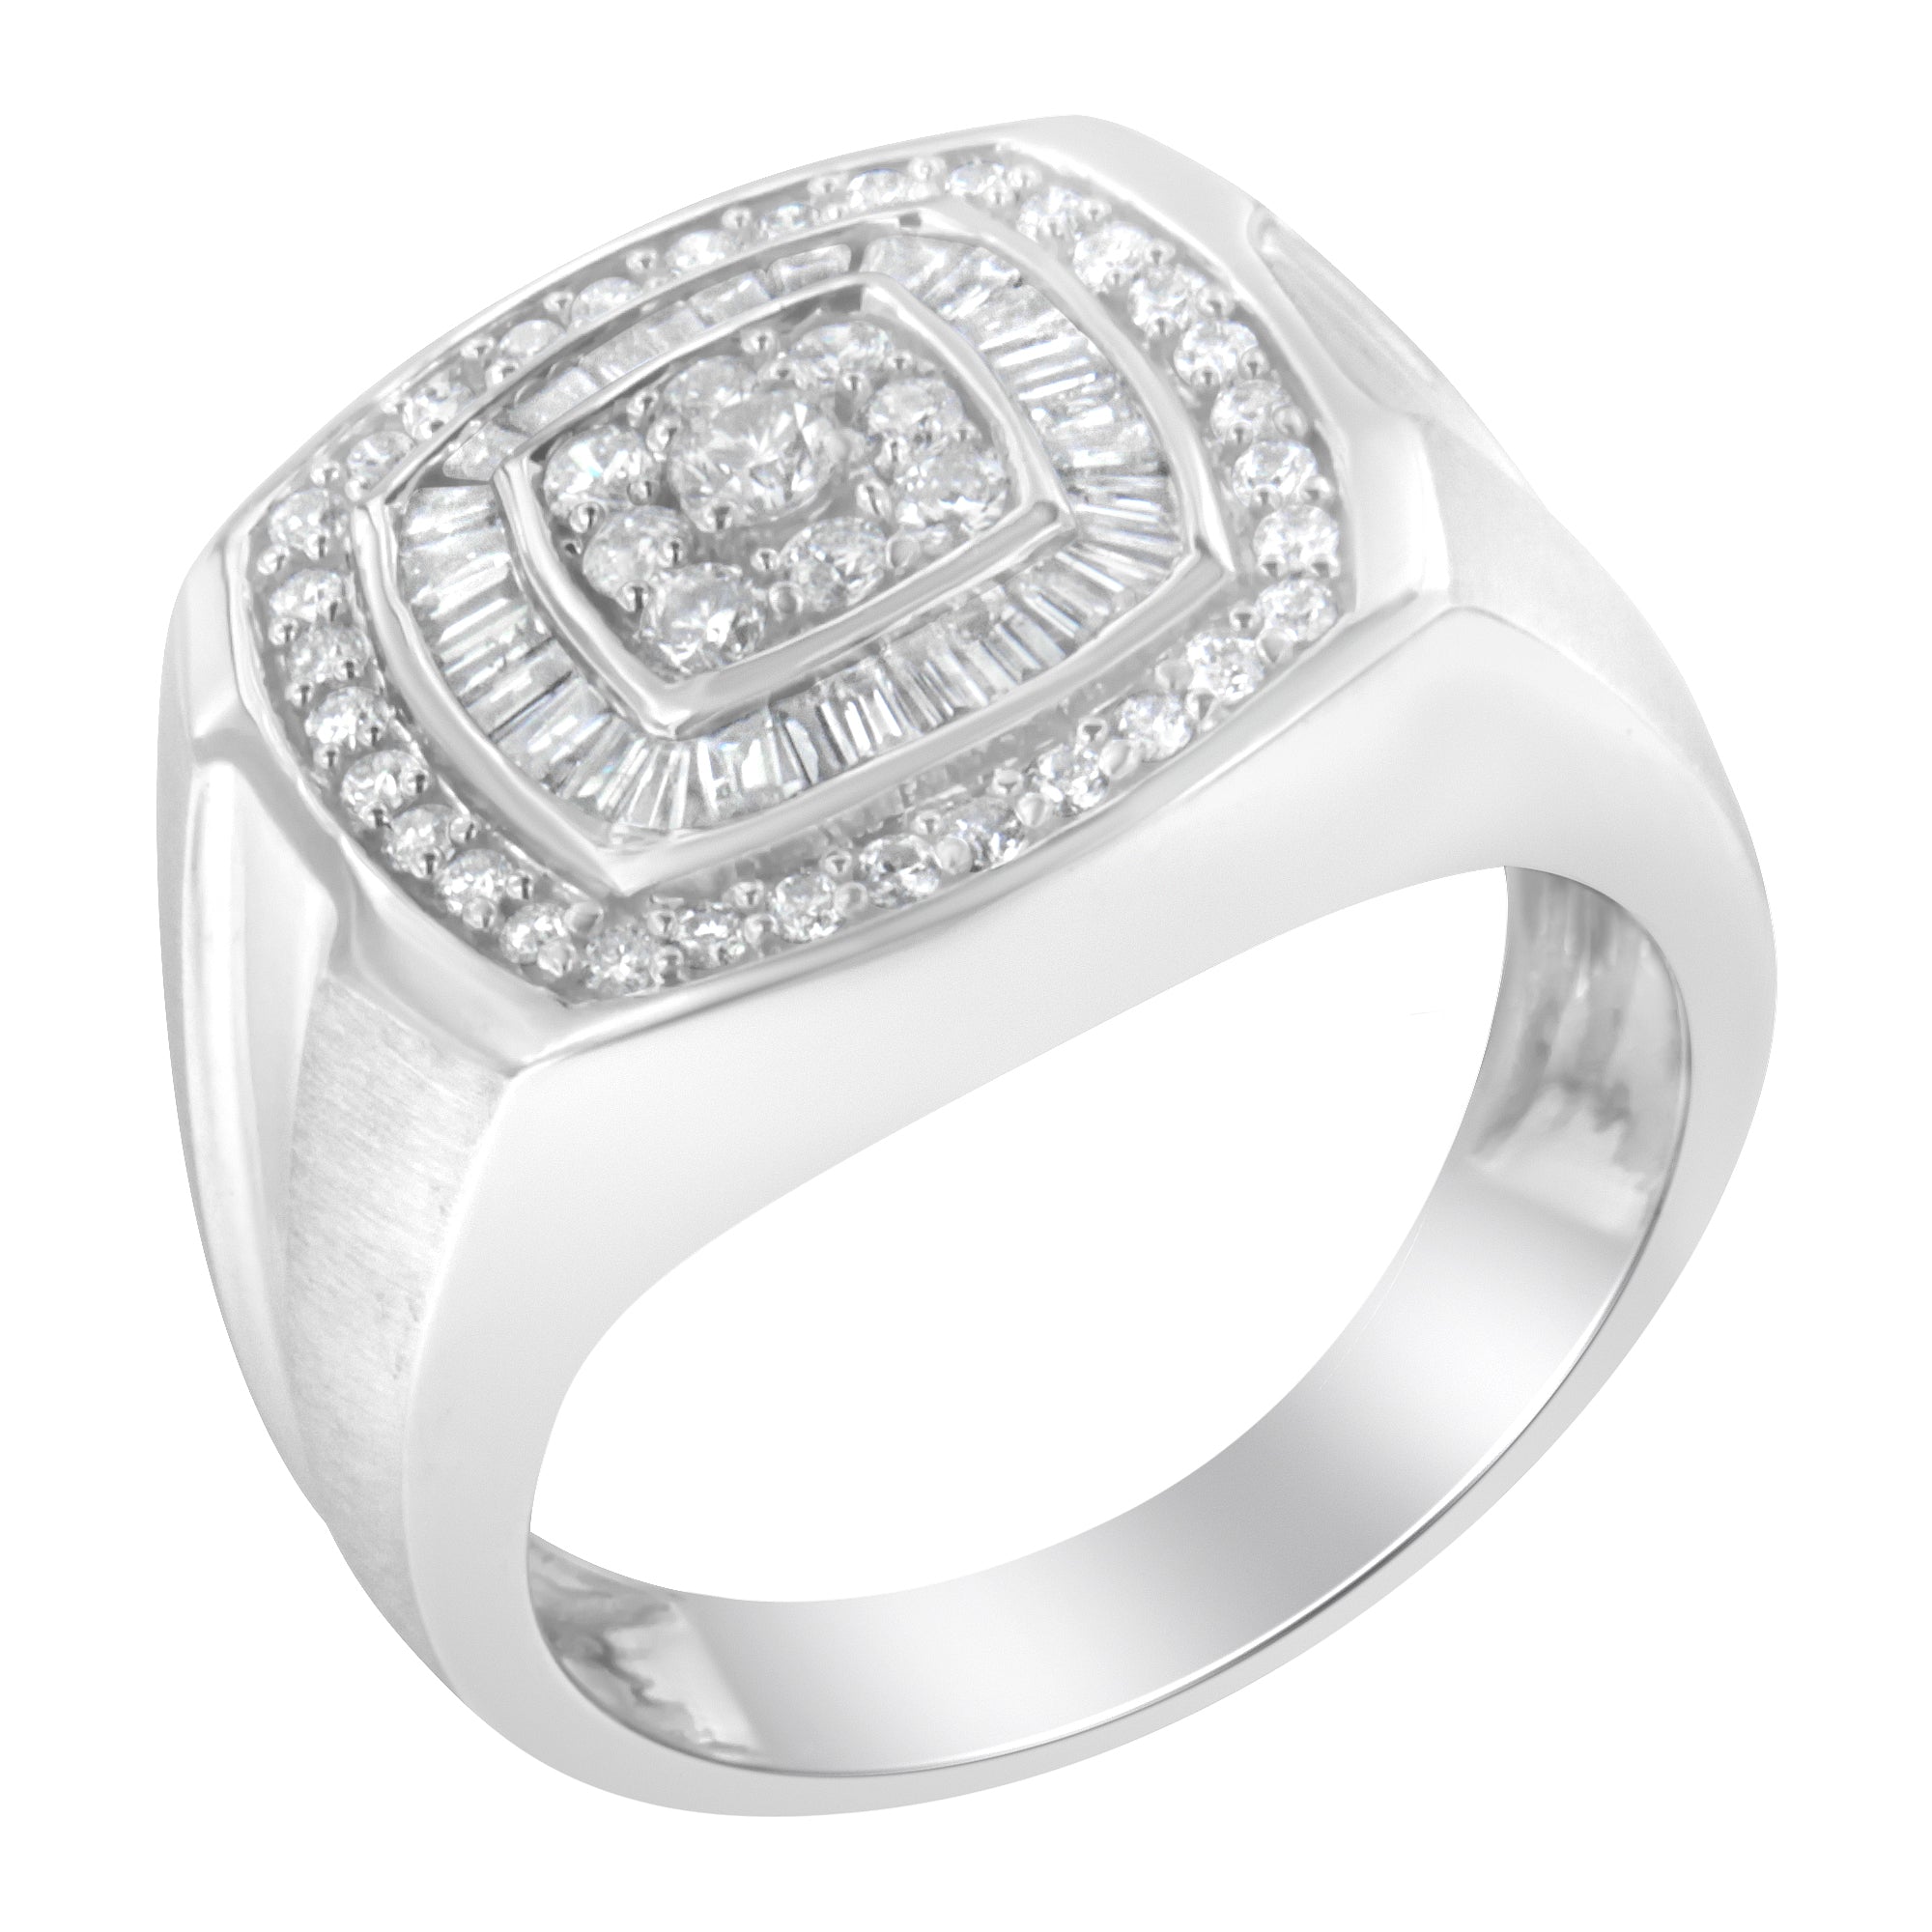 14K White Gold Men's Diamond Band Ring (1 cttw, H-I Color, SI1-SI2 Clarity) - LinkagejewelrydesignLinkagejewelrydesign